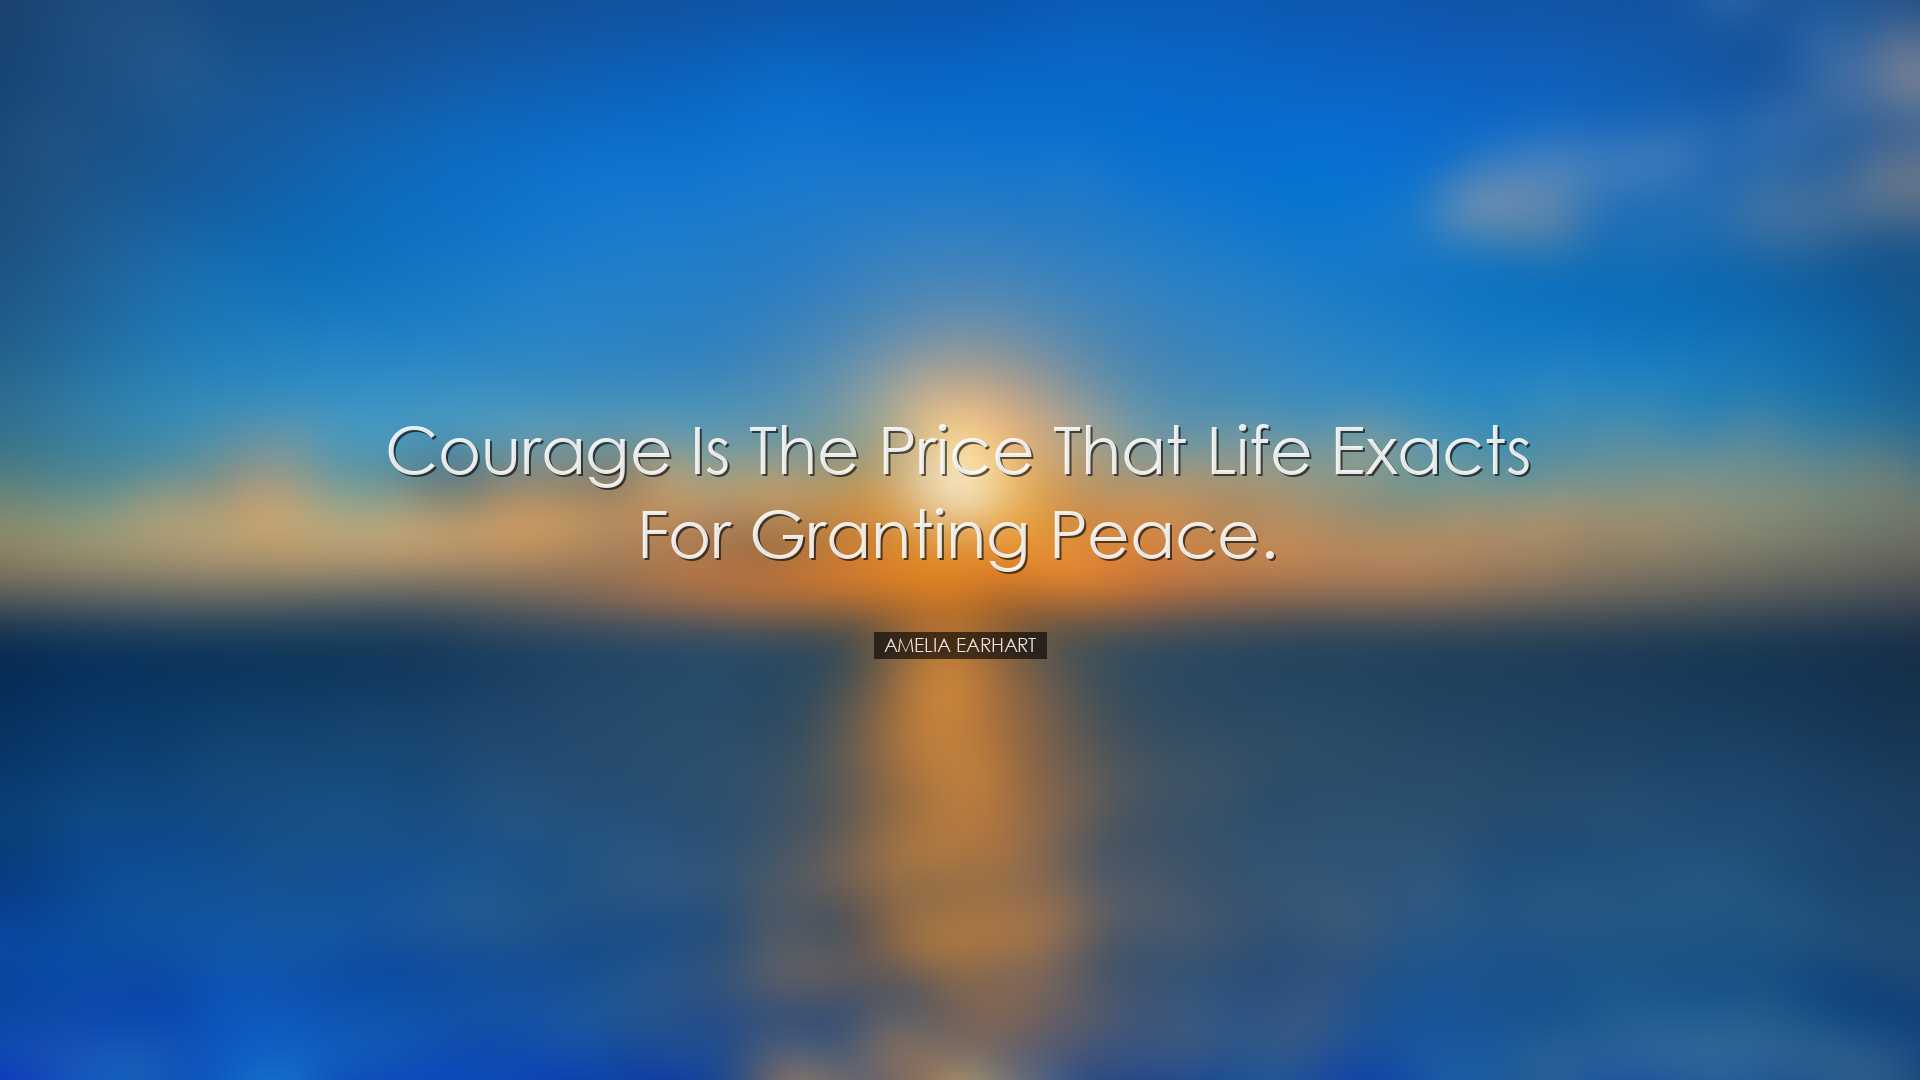 Courage is the price that life exacts for granting peace. - Amelia